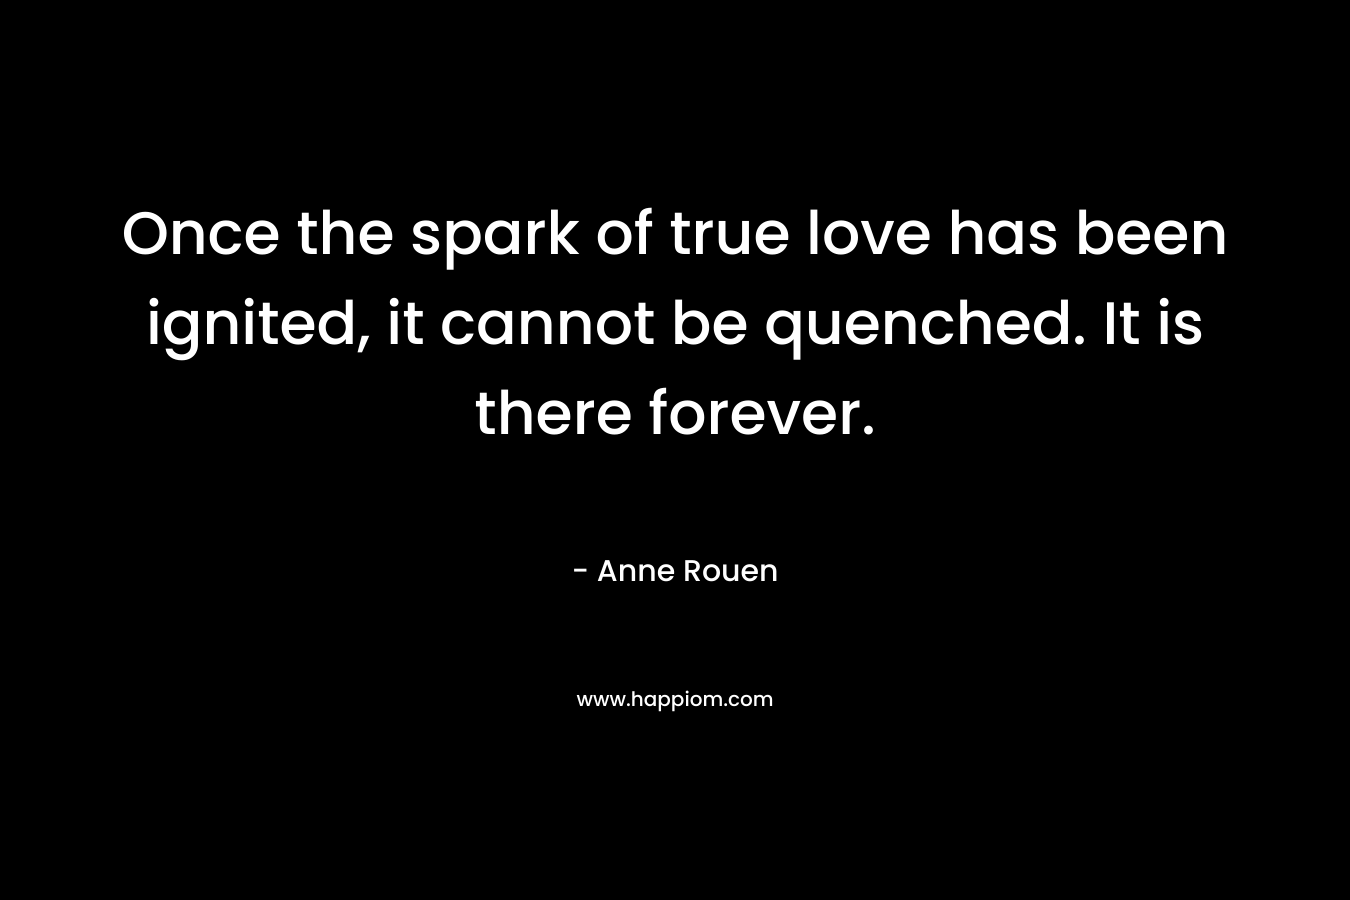 Once the spark of true love has been ignited, it cannot be quenched. It is there forever.